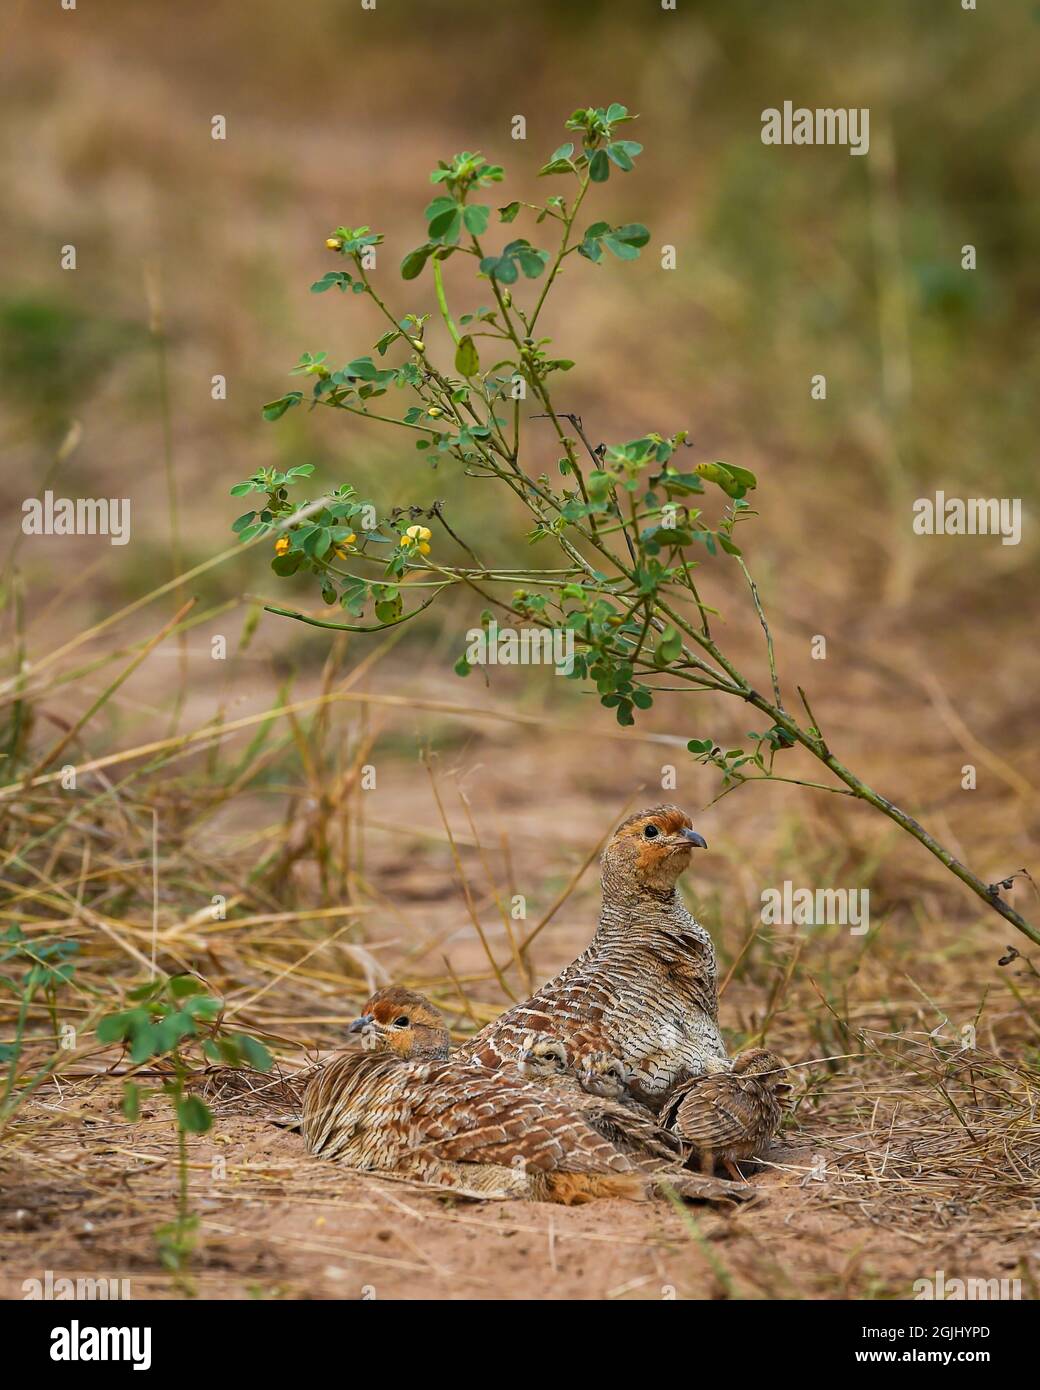 grey francolin or grey partridge or Francolinus pondicerianus family in natural monsoon green background at Ranthambore national park or tiger reserve Stock Photo